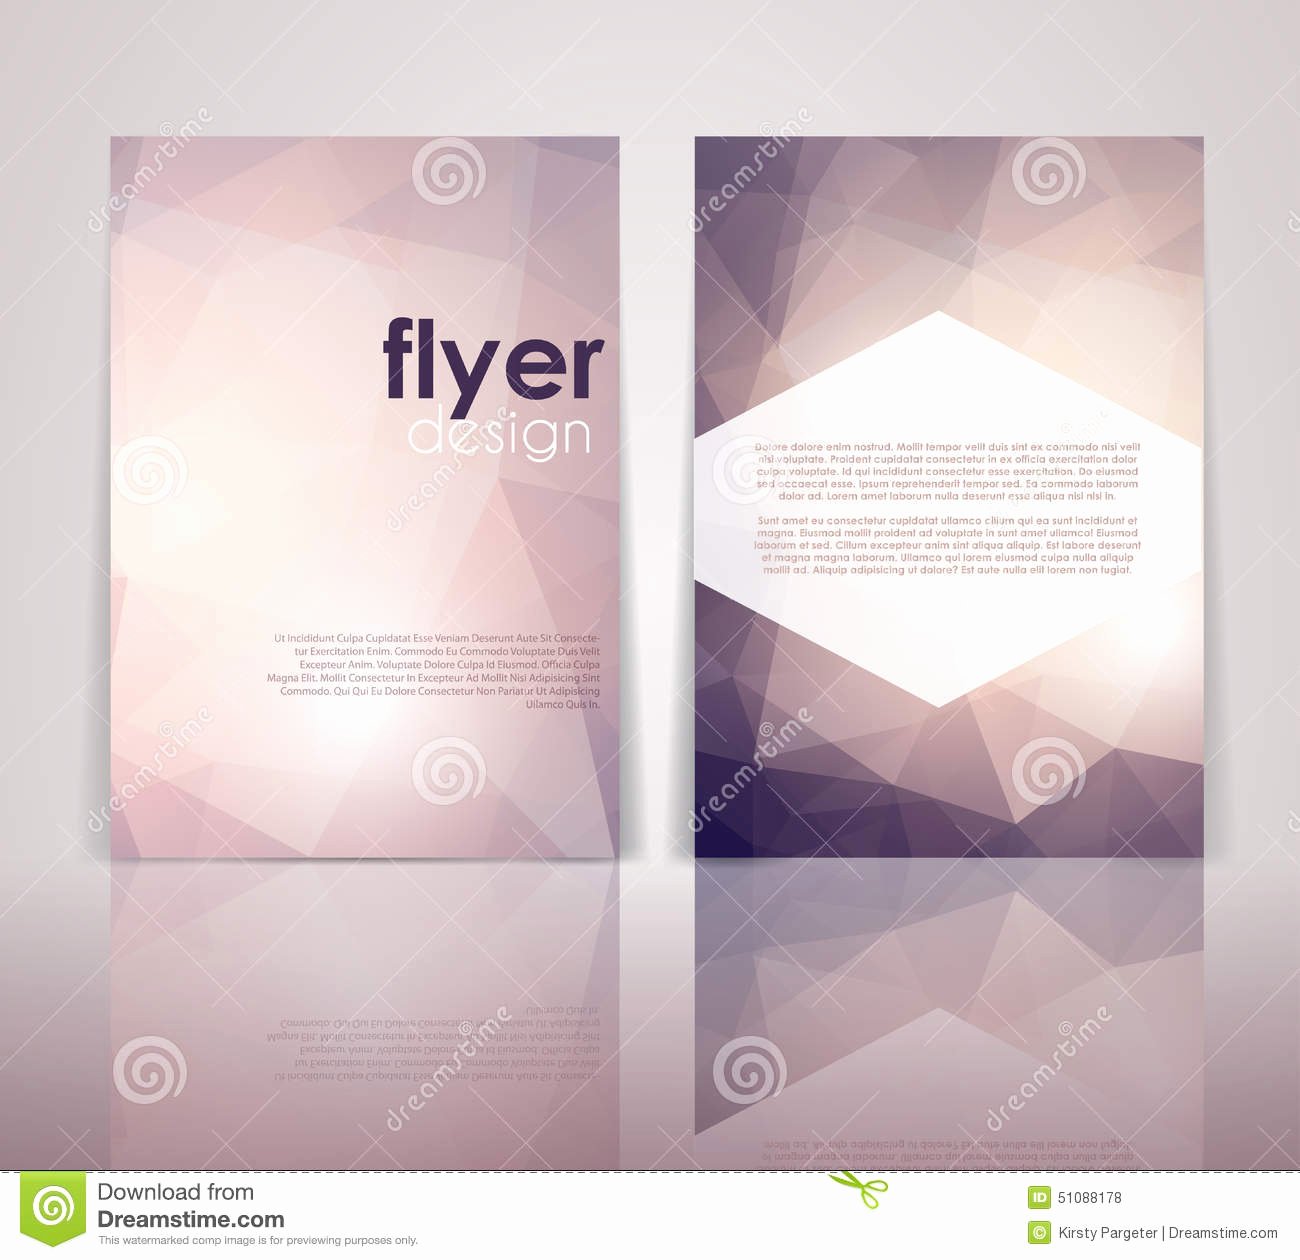 Double Sided Brochure Template New Double Sided Flyer Design Stock Vector Image Of ornament